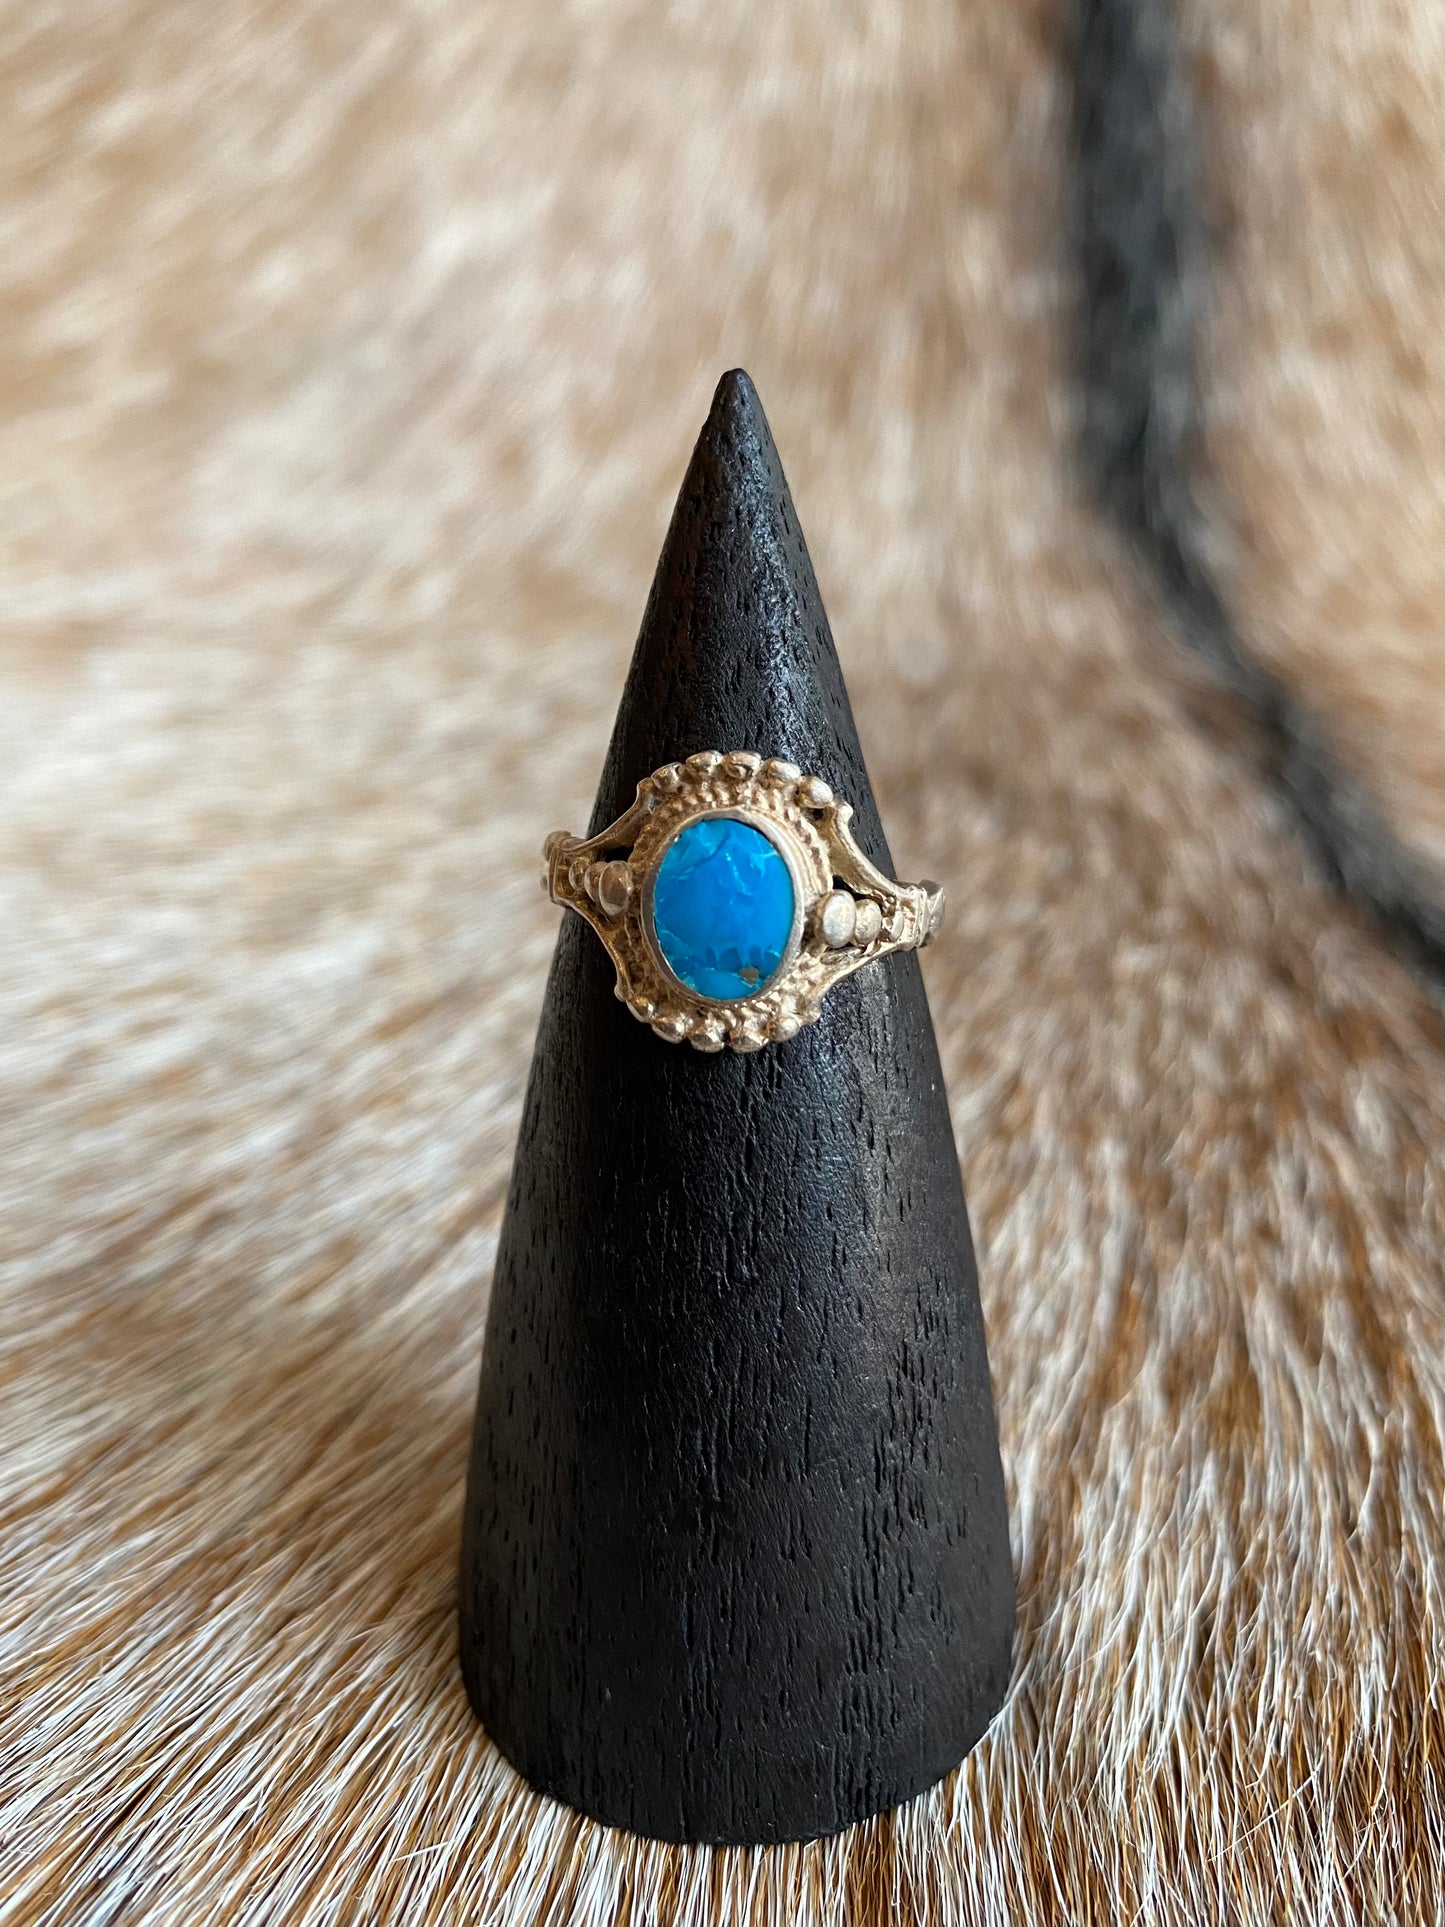 Vintage Sterling Silver Faux Turquoise Ring